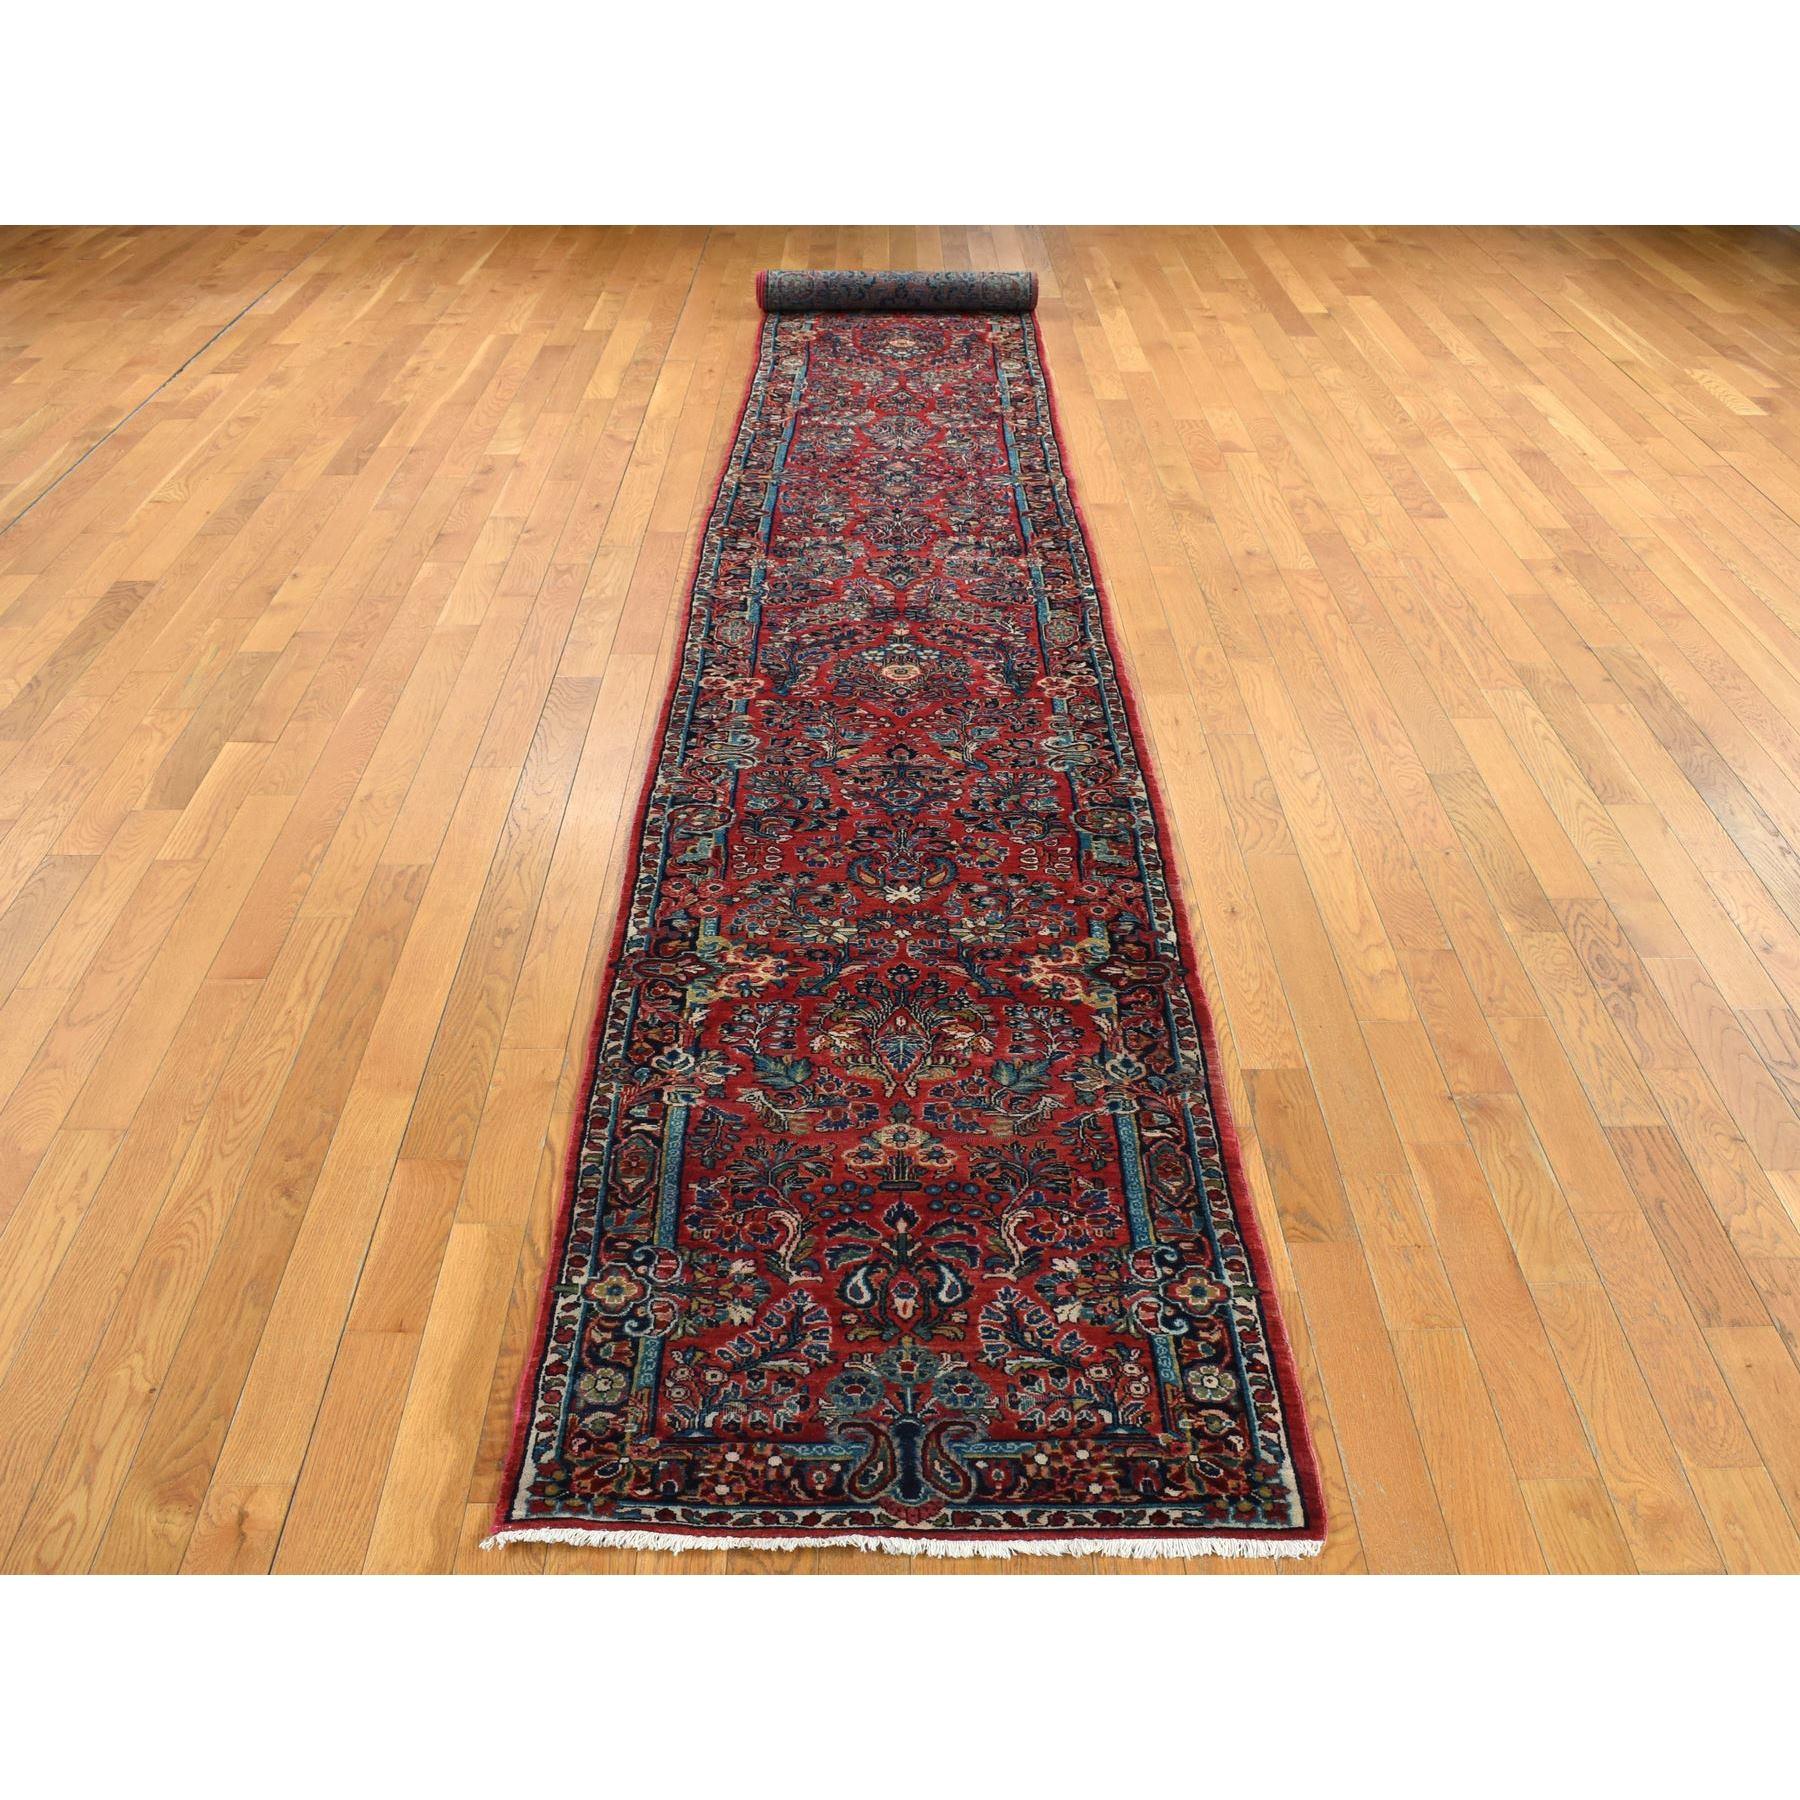 This fabulous Hand-Knotted carpet has been created and designed for extra strength and durability. This rug has been handcrafted for weeks in the traditional method that is used to make
Exact Rug Size in Feet and Inches : 2'6